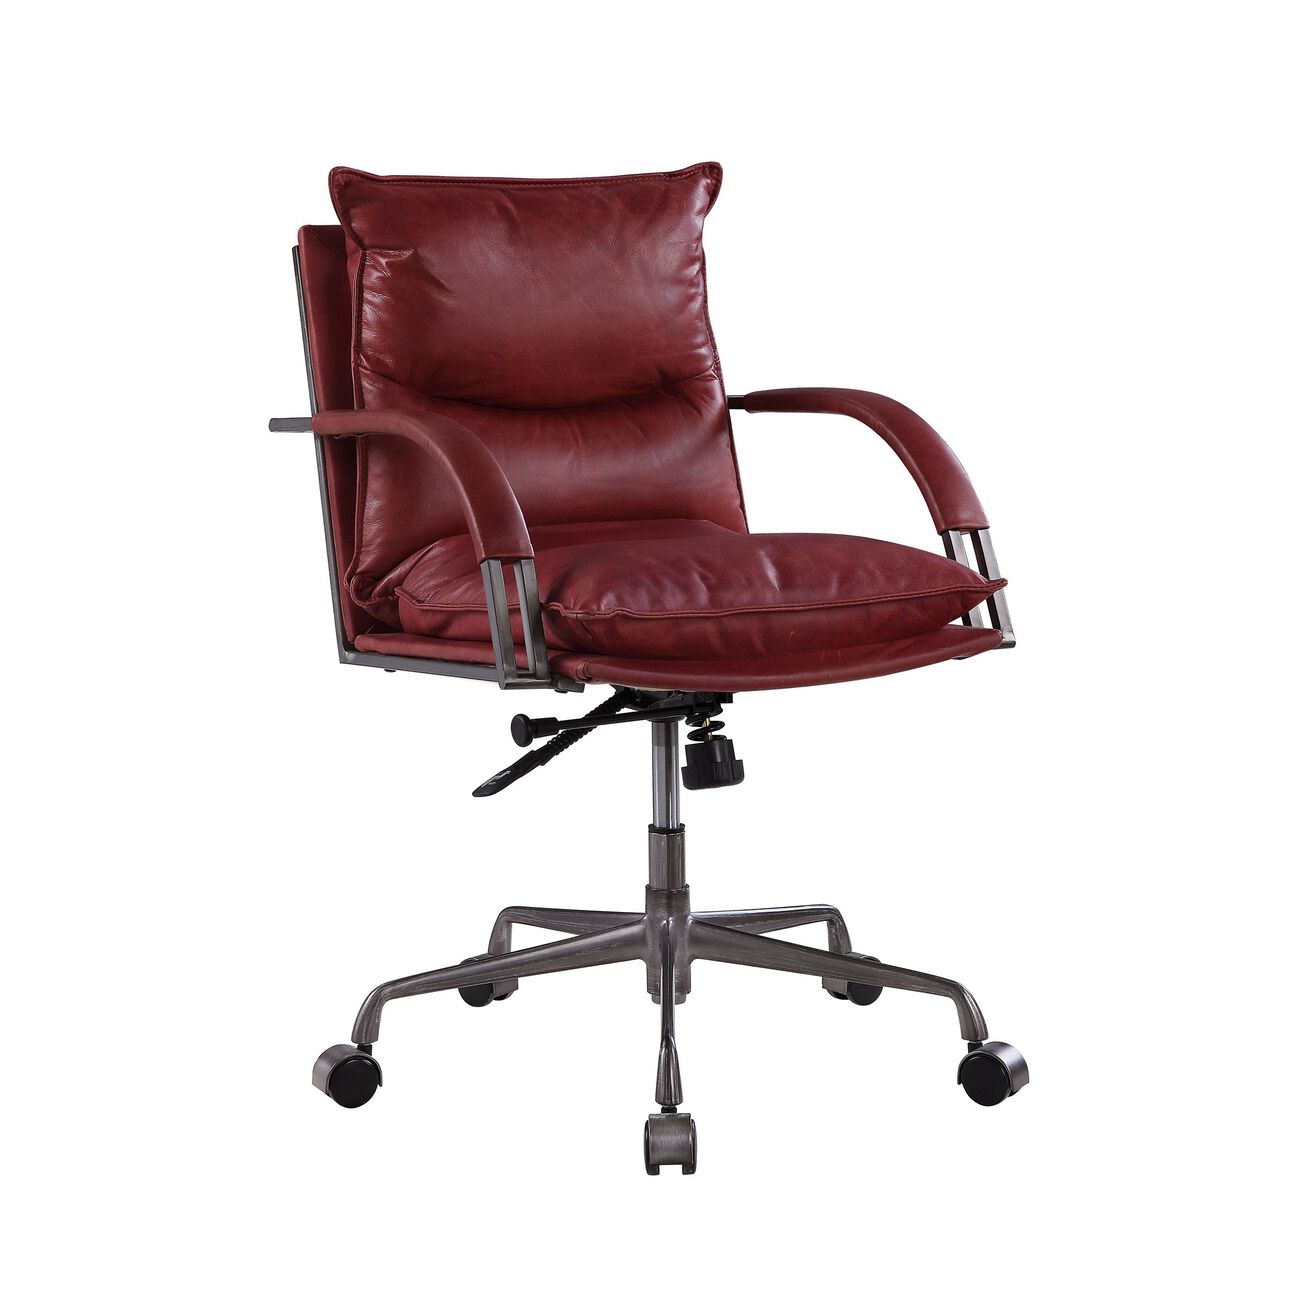 Swivel Leatherette Tufted Office Chair with Metal Star Base, Red